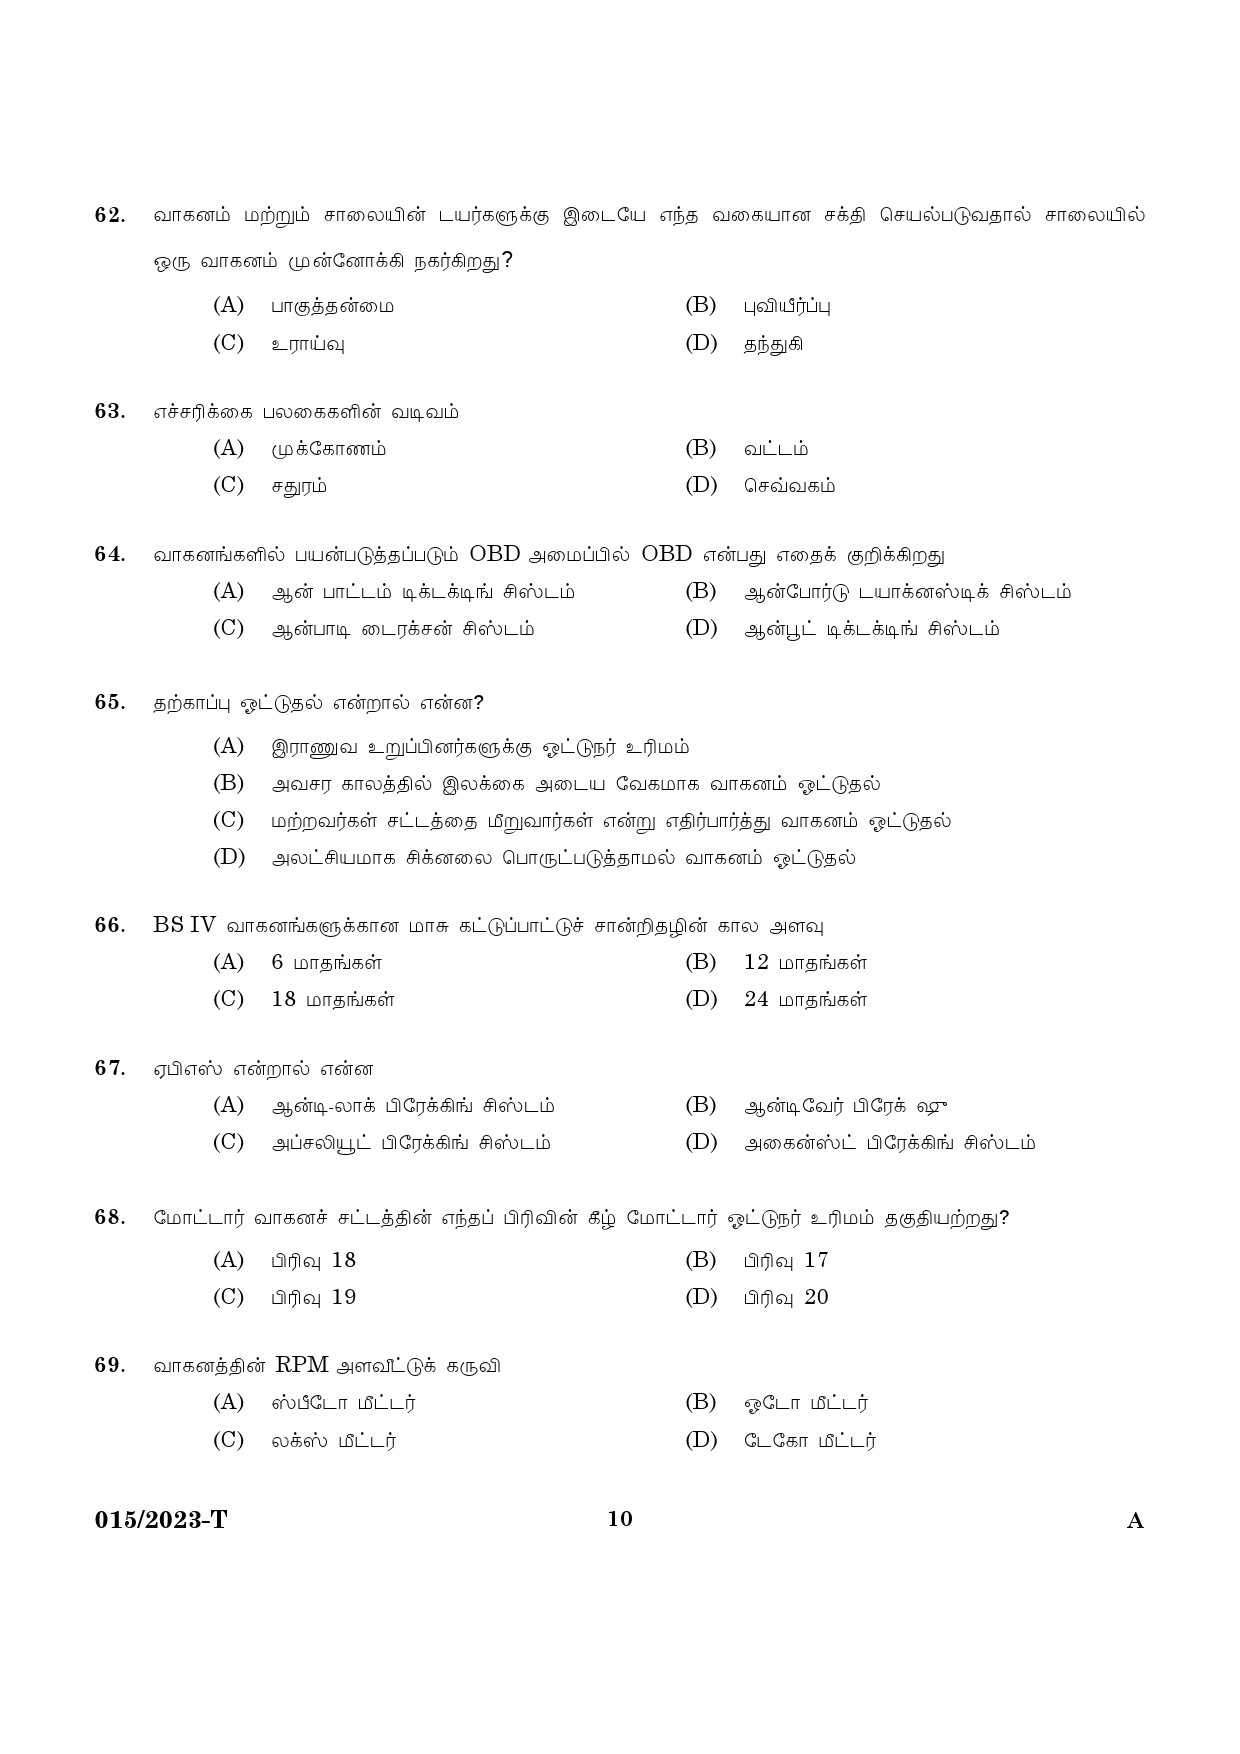 KPSC Driver and Office Attendant Tamil Exam 2023 Code 0152023 8